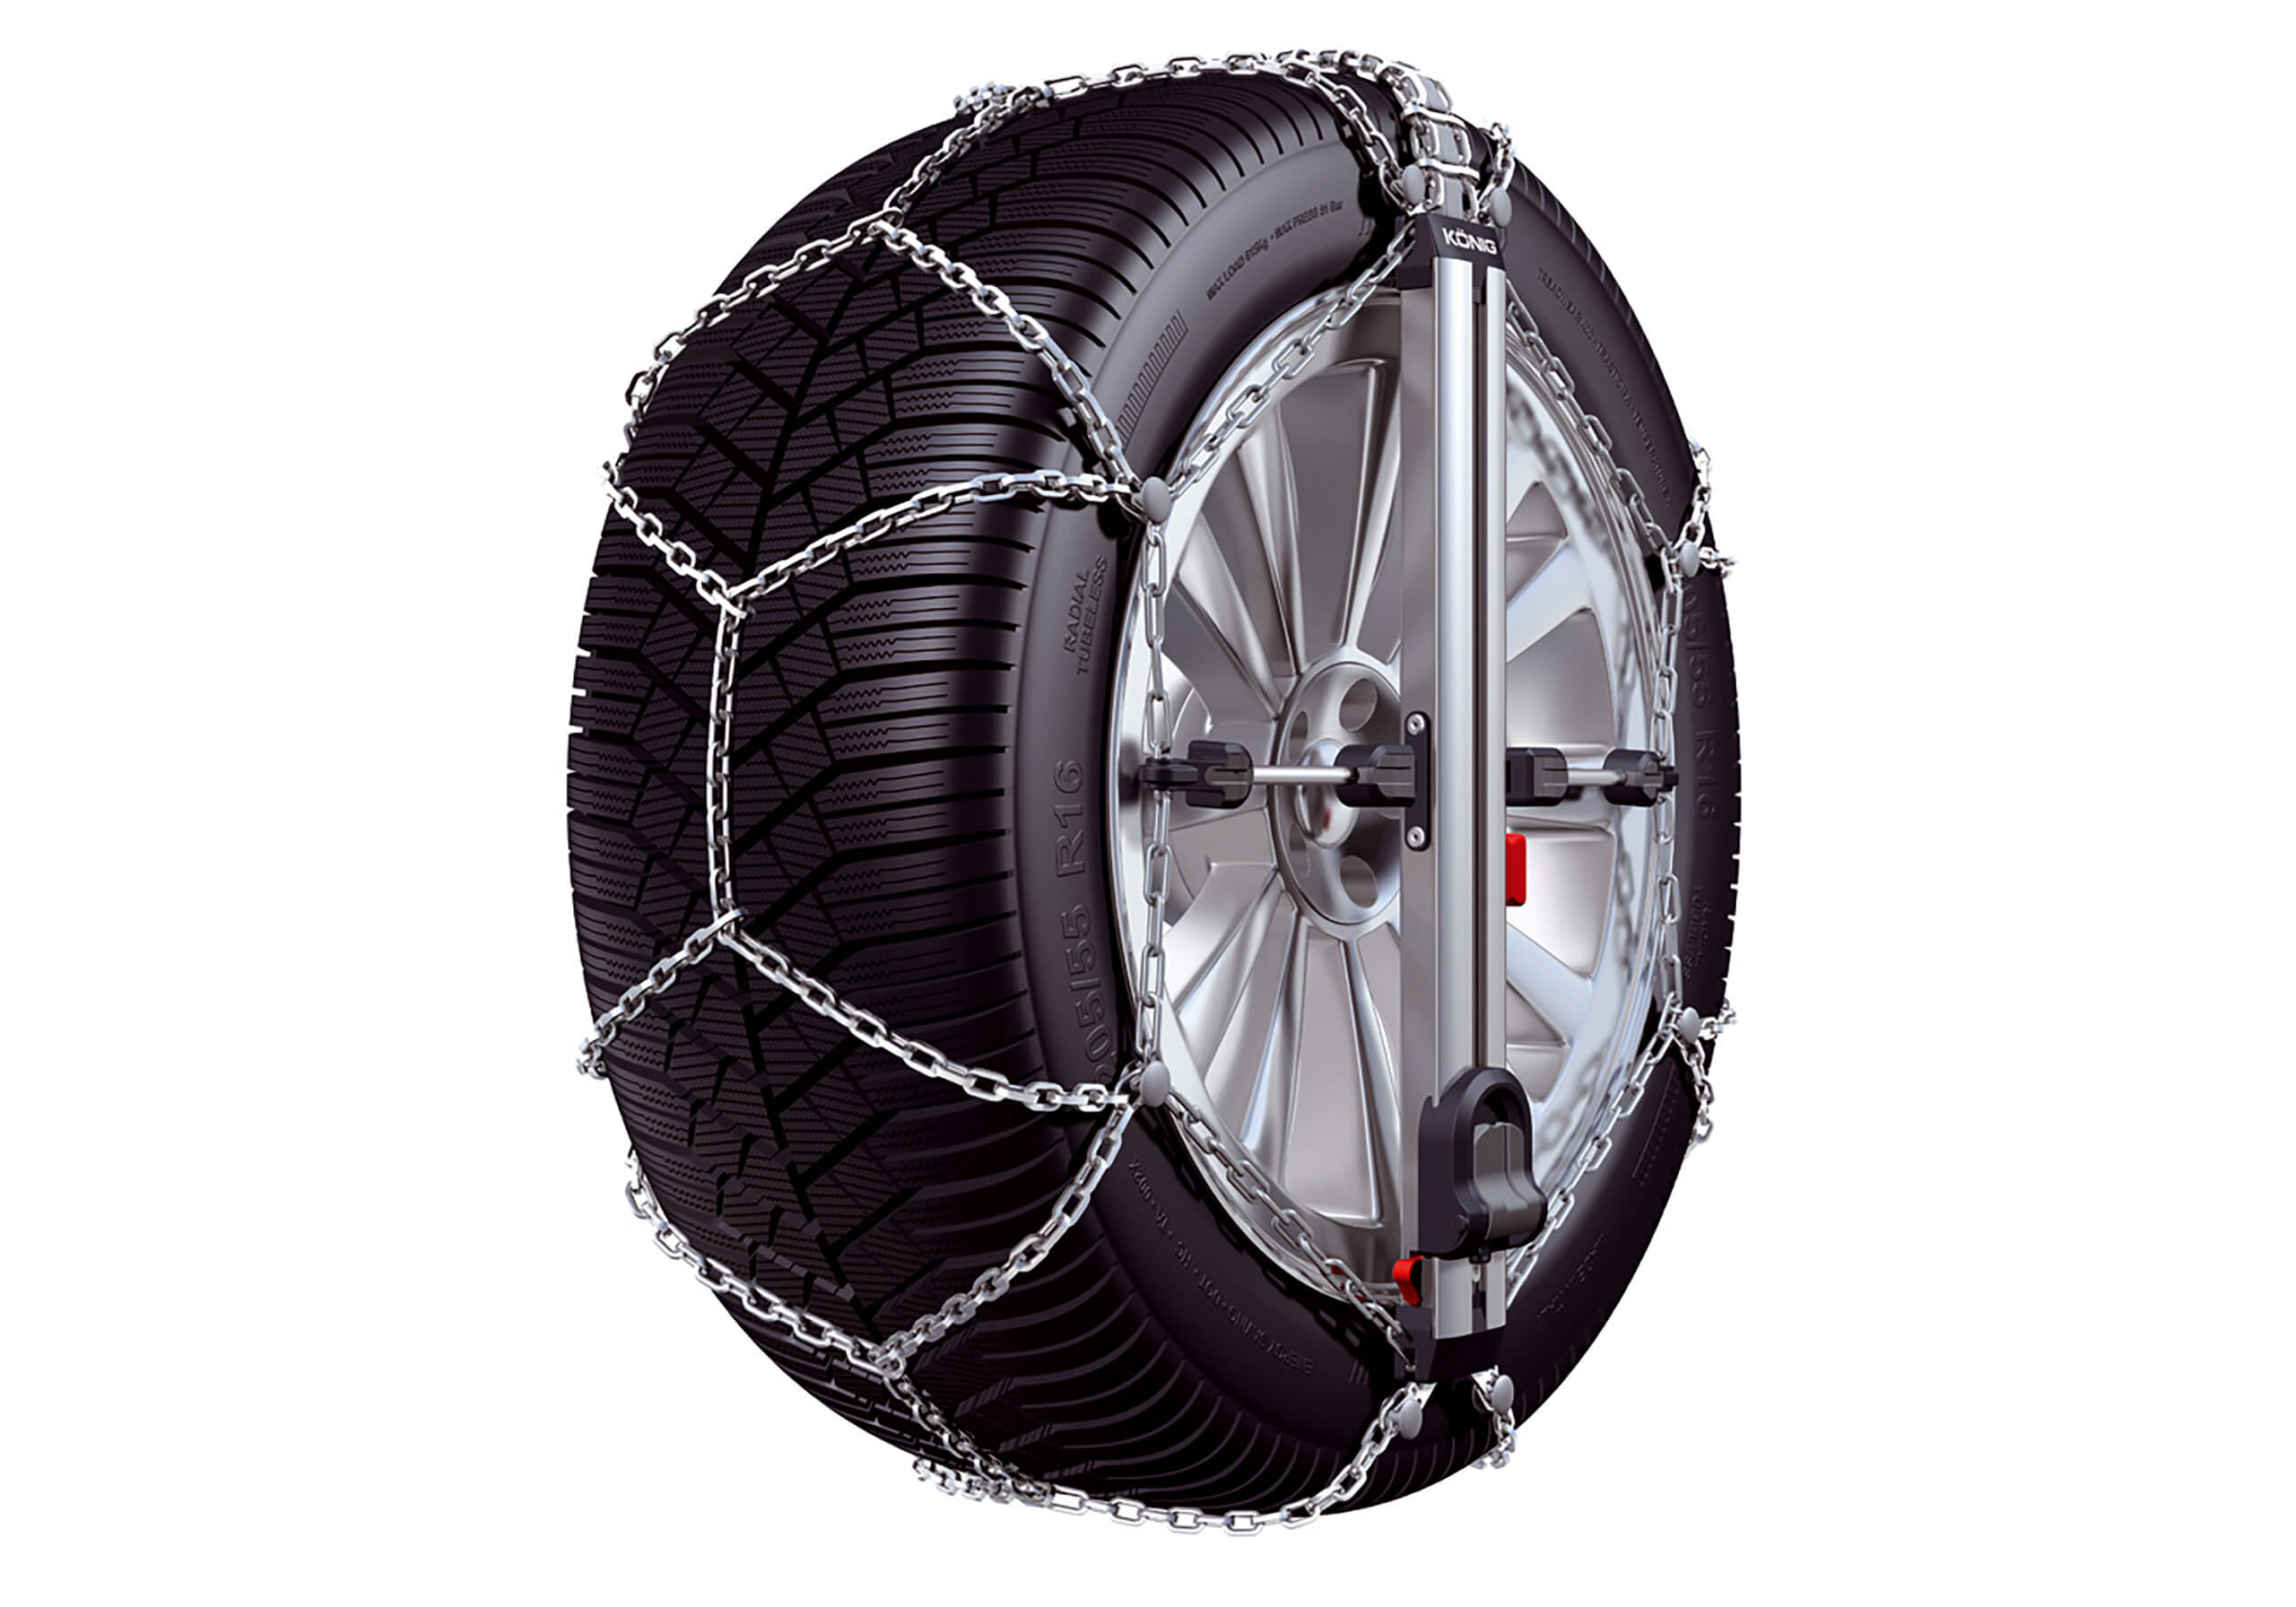 BMW 3 series coupe (2002 to 2006):Knig CU-9 Easy-fit snow chains (pair) no. KGCU-9 090